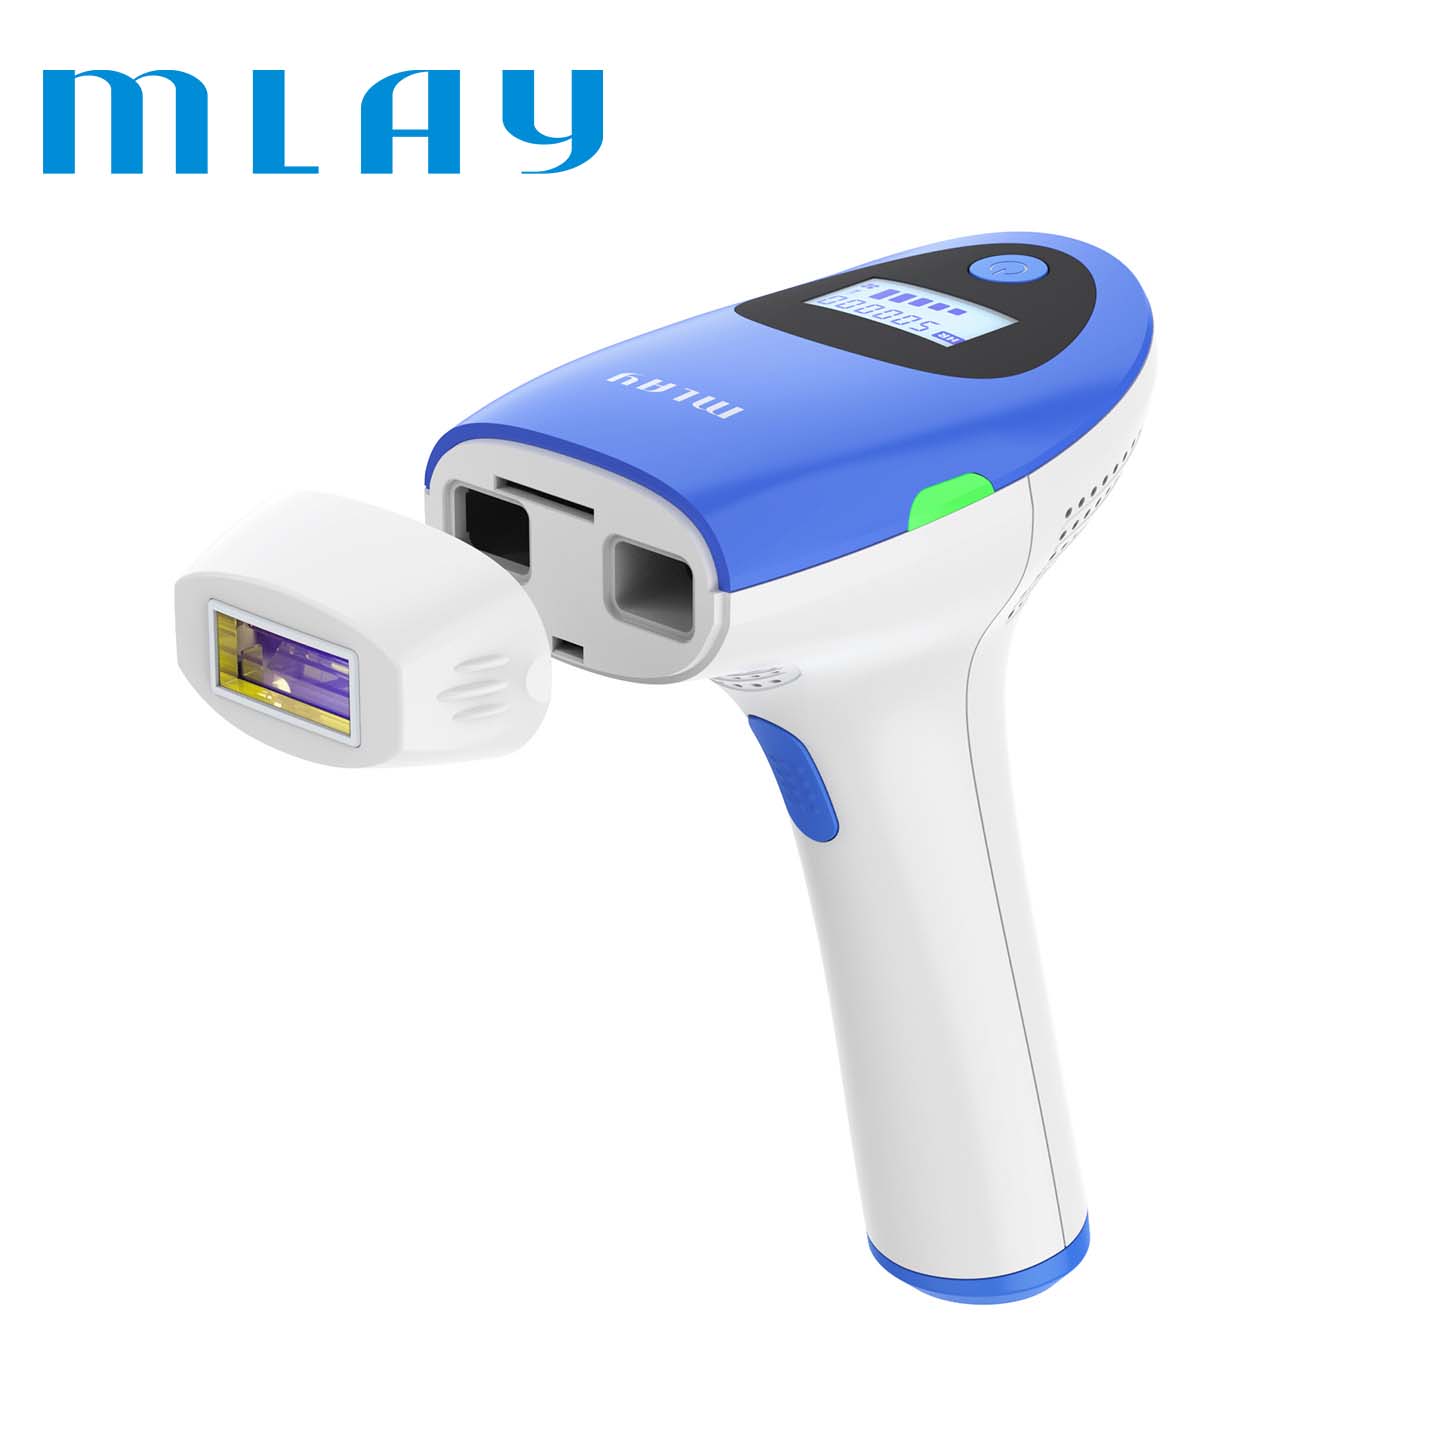 MLAY 2021 T3 3lamps in 1 IPL Body Hair Removal Laser System Home Use Beauty Care Device 500000 Flashes